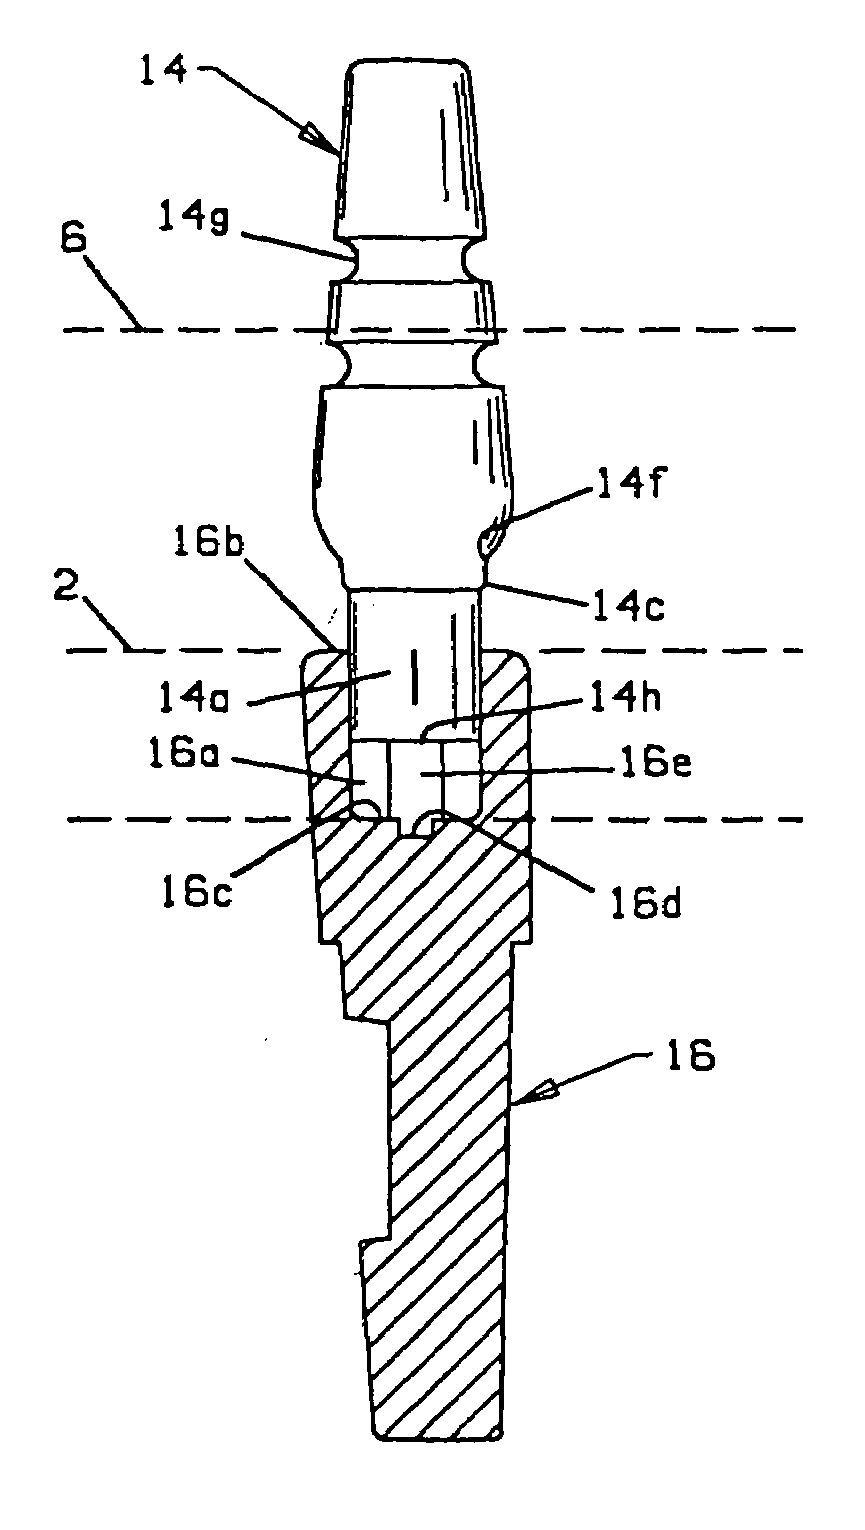 Method and apparatus for replicating the position of intra-osseous implants and abutments relative to analogs thereof